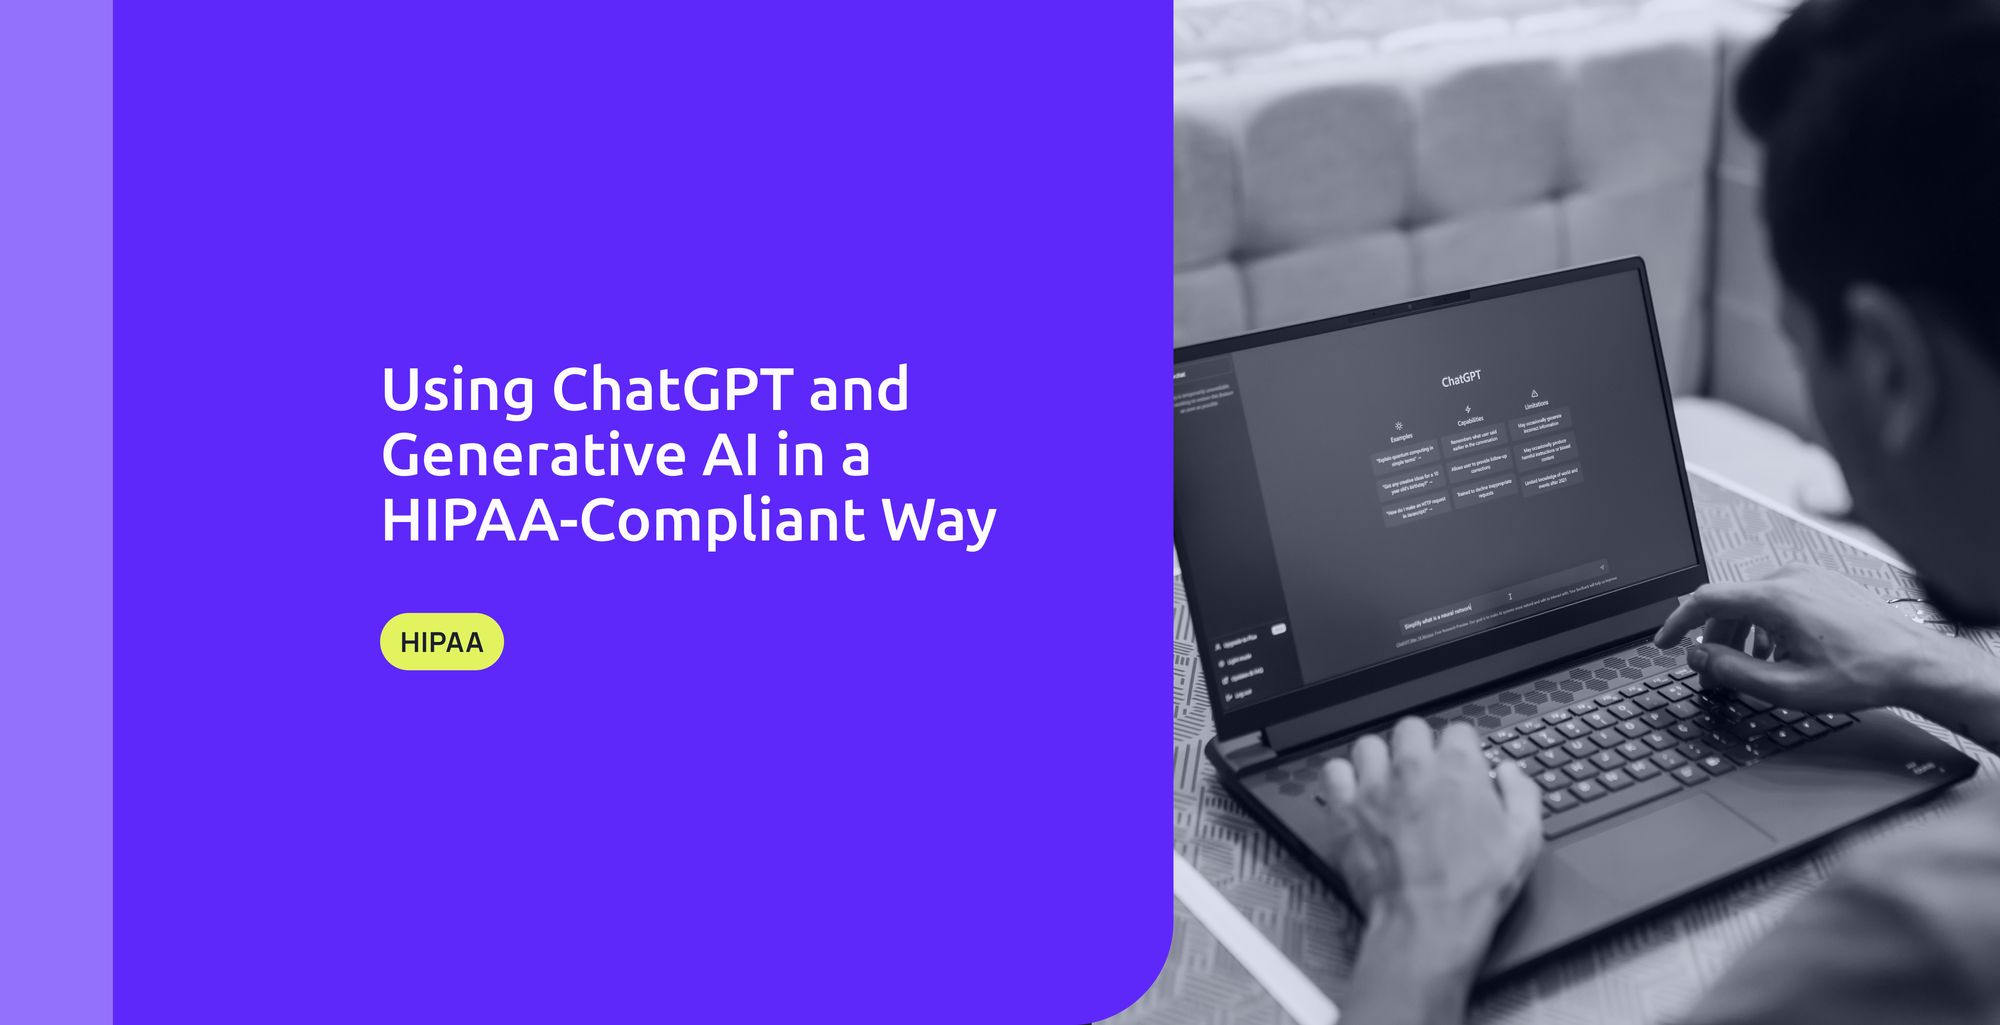 Using ChatGPT and Generative AI in a HIPAA-Compliant Way